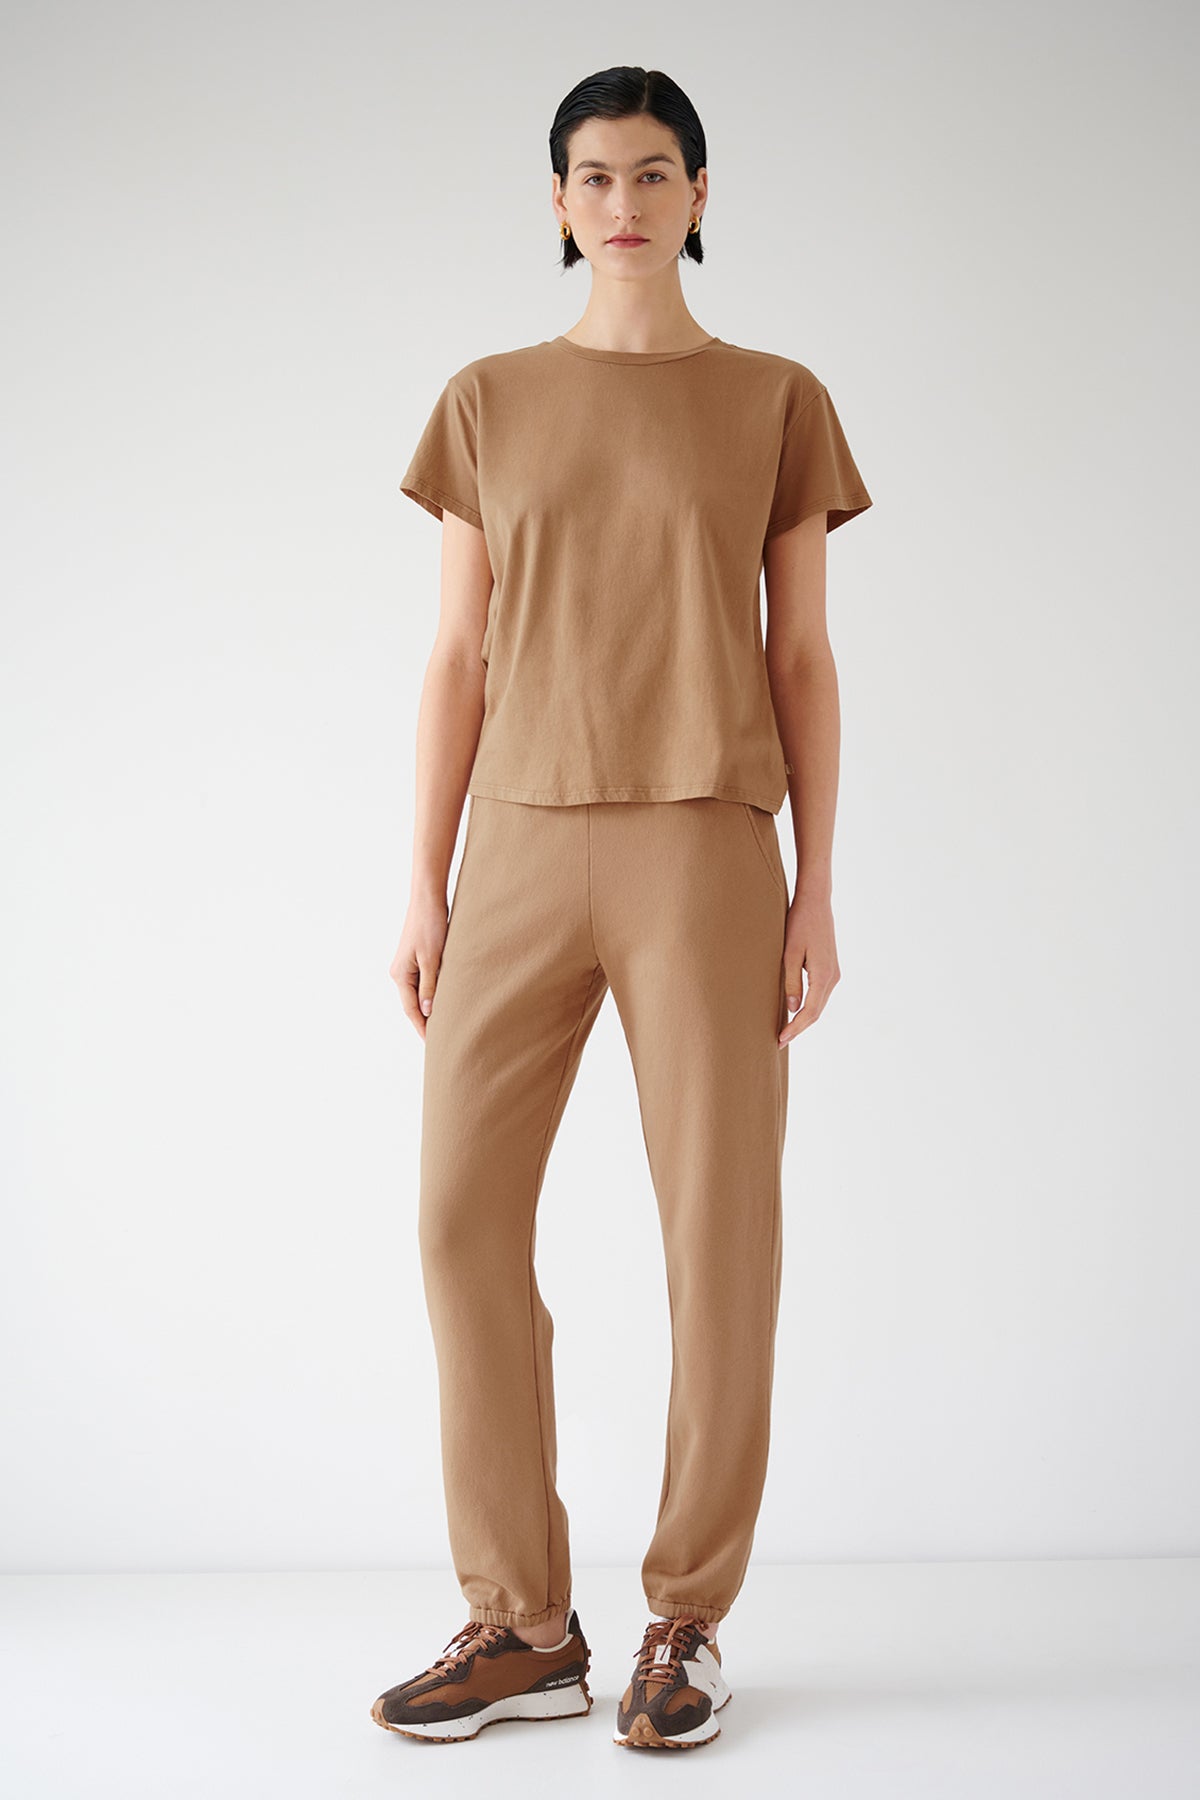 The model is wearing a tan t-shirt and Velvet by Jenny Graham ZUMA SWEATPANT.-35547979088065